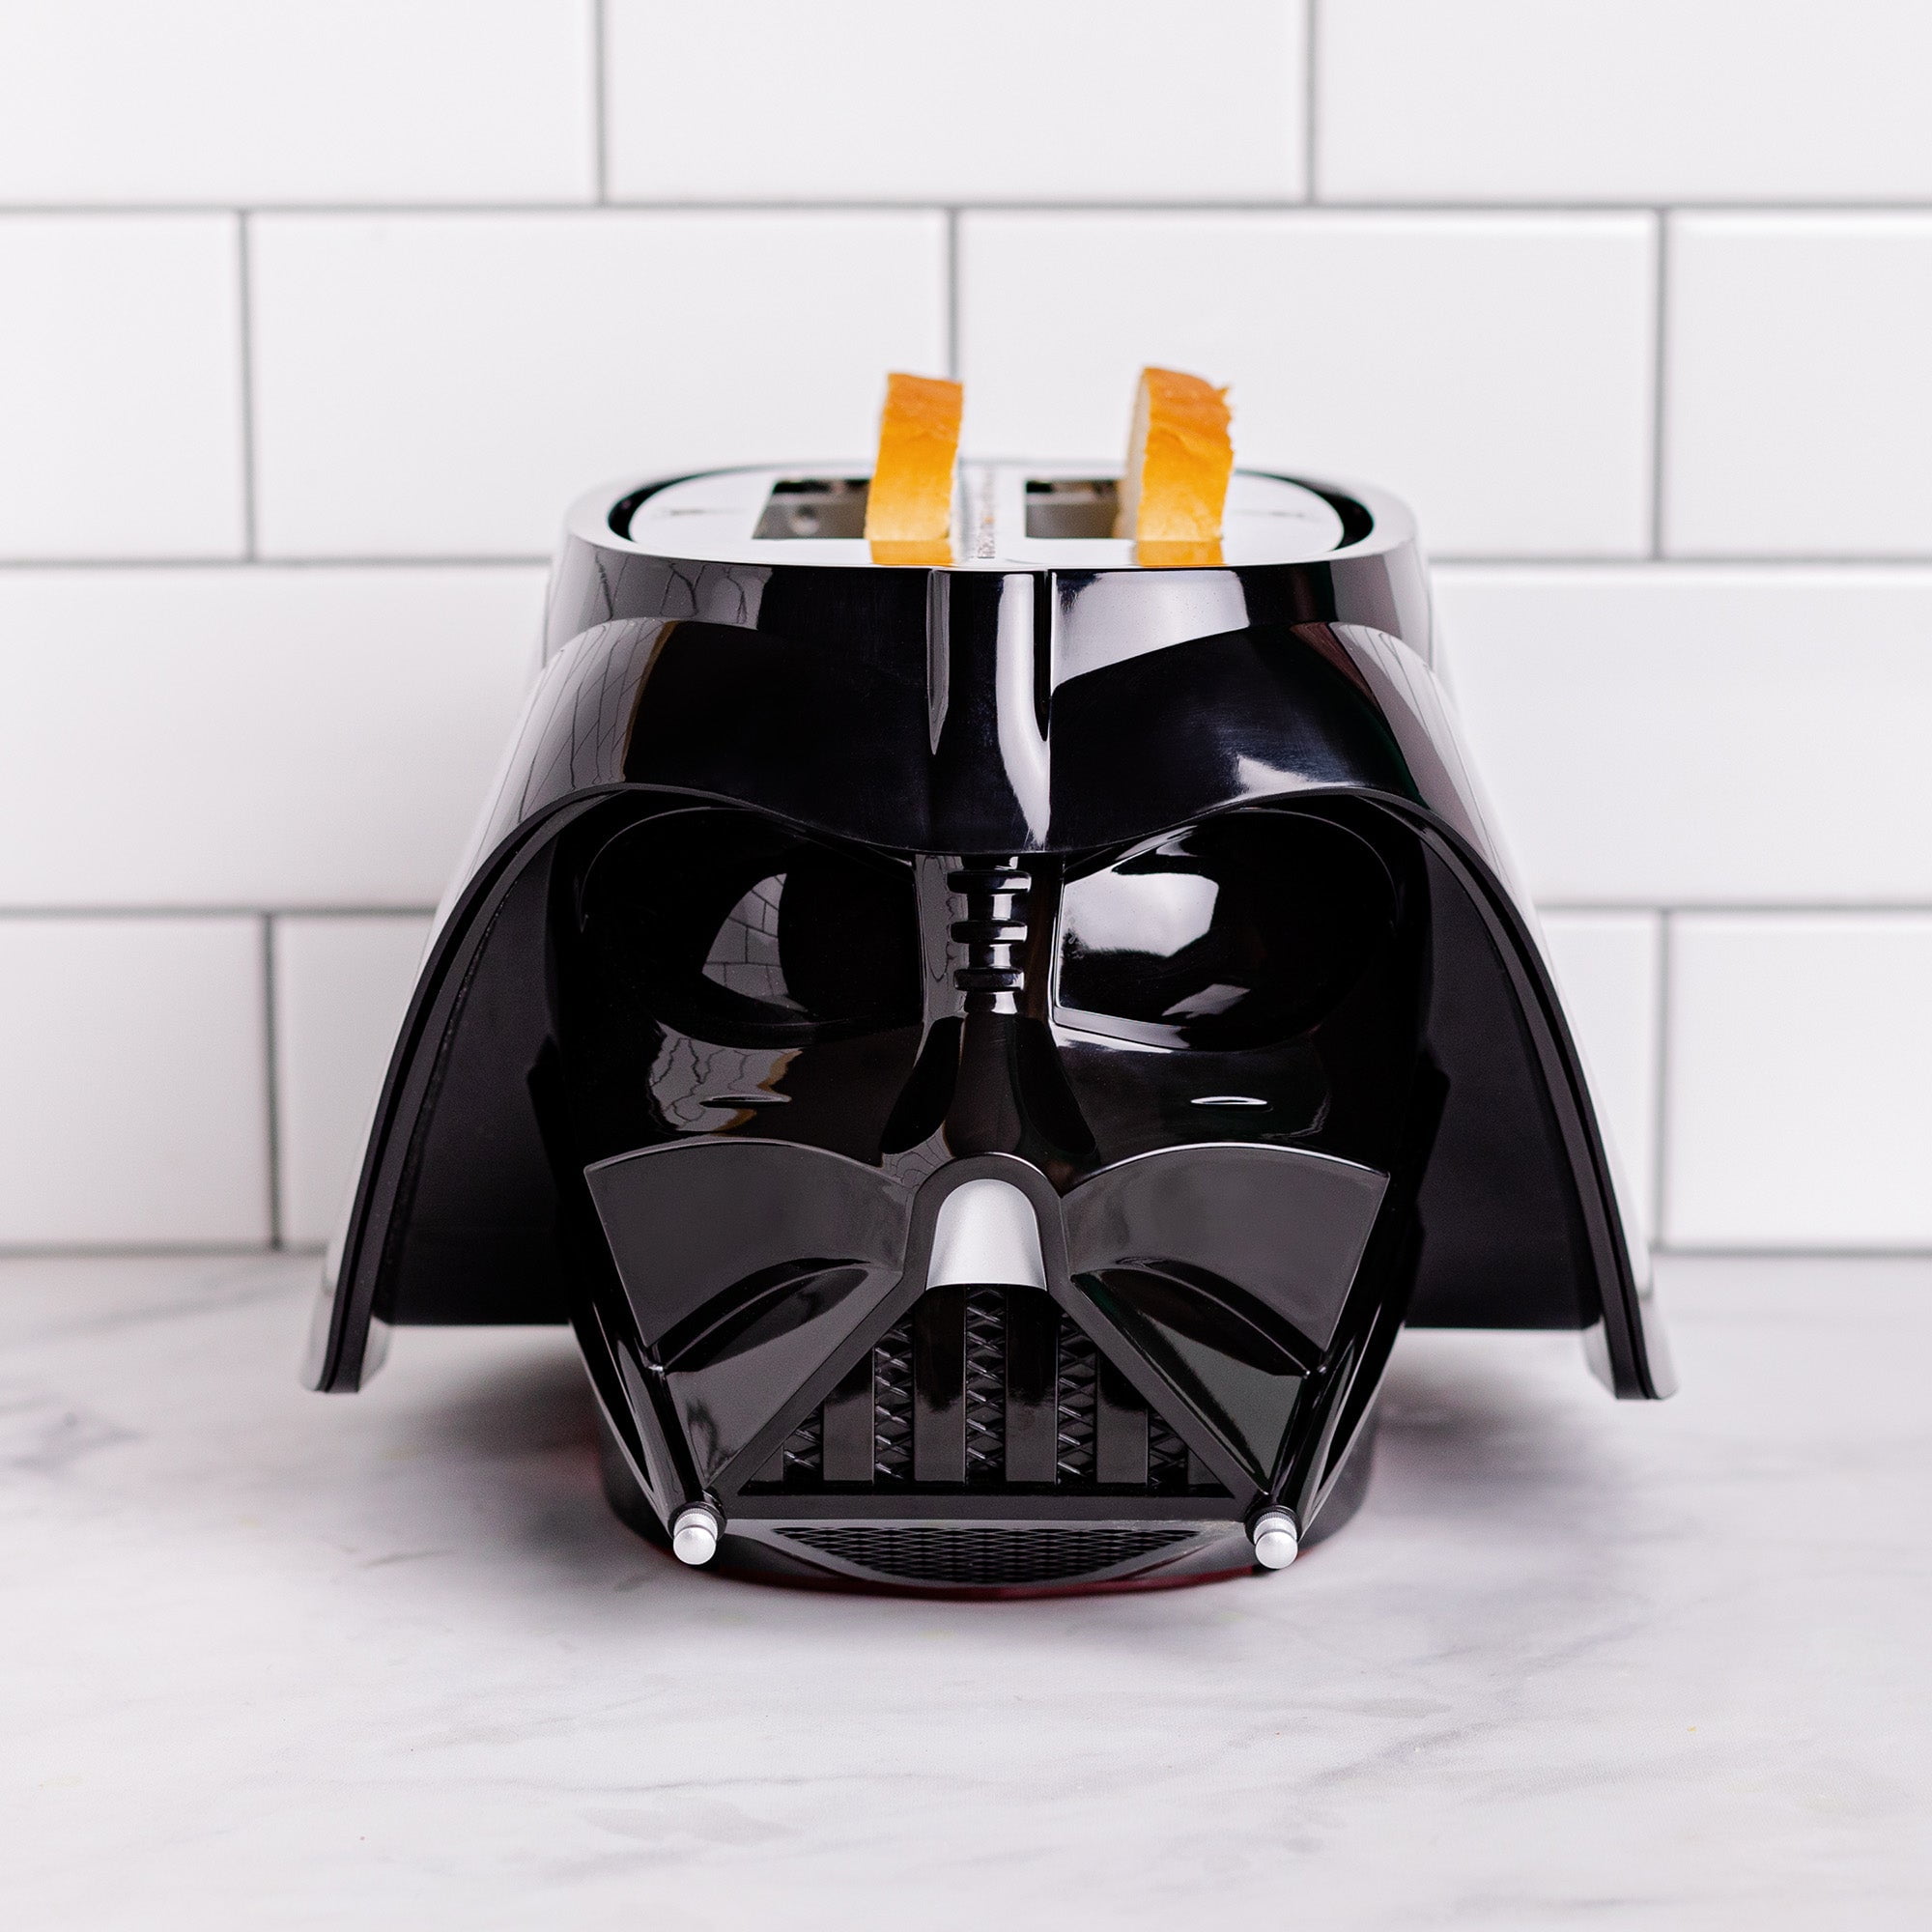 Star Wars Darth Vader Toaster Bread English Muffins Toaster Pastry New Waffles 